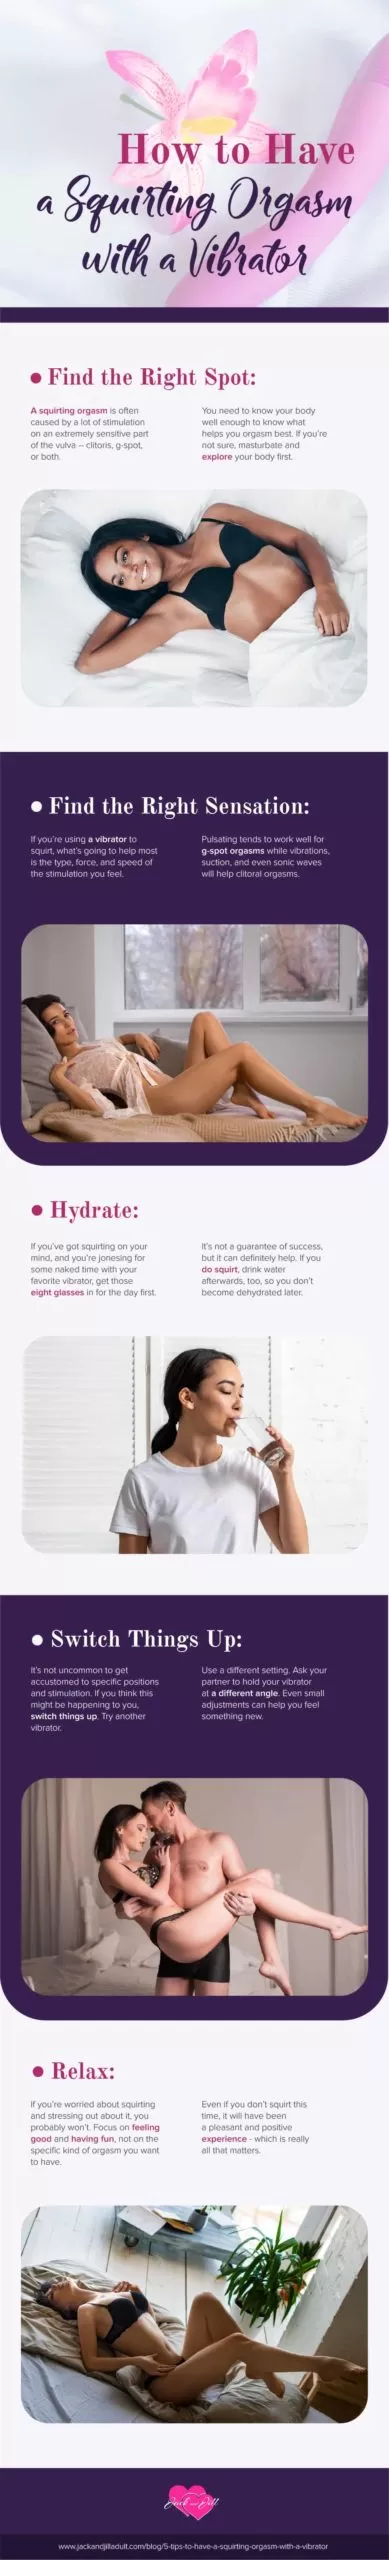 Infographic for 5 Tips to Have a Squirting Orgasm with a Vibrator